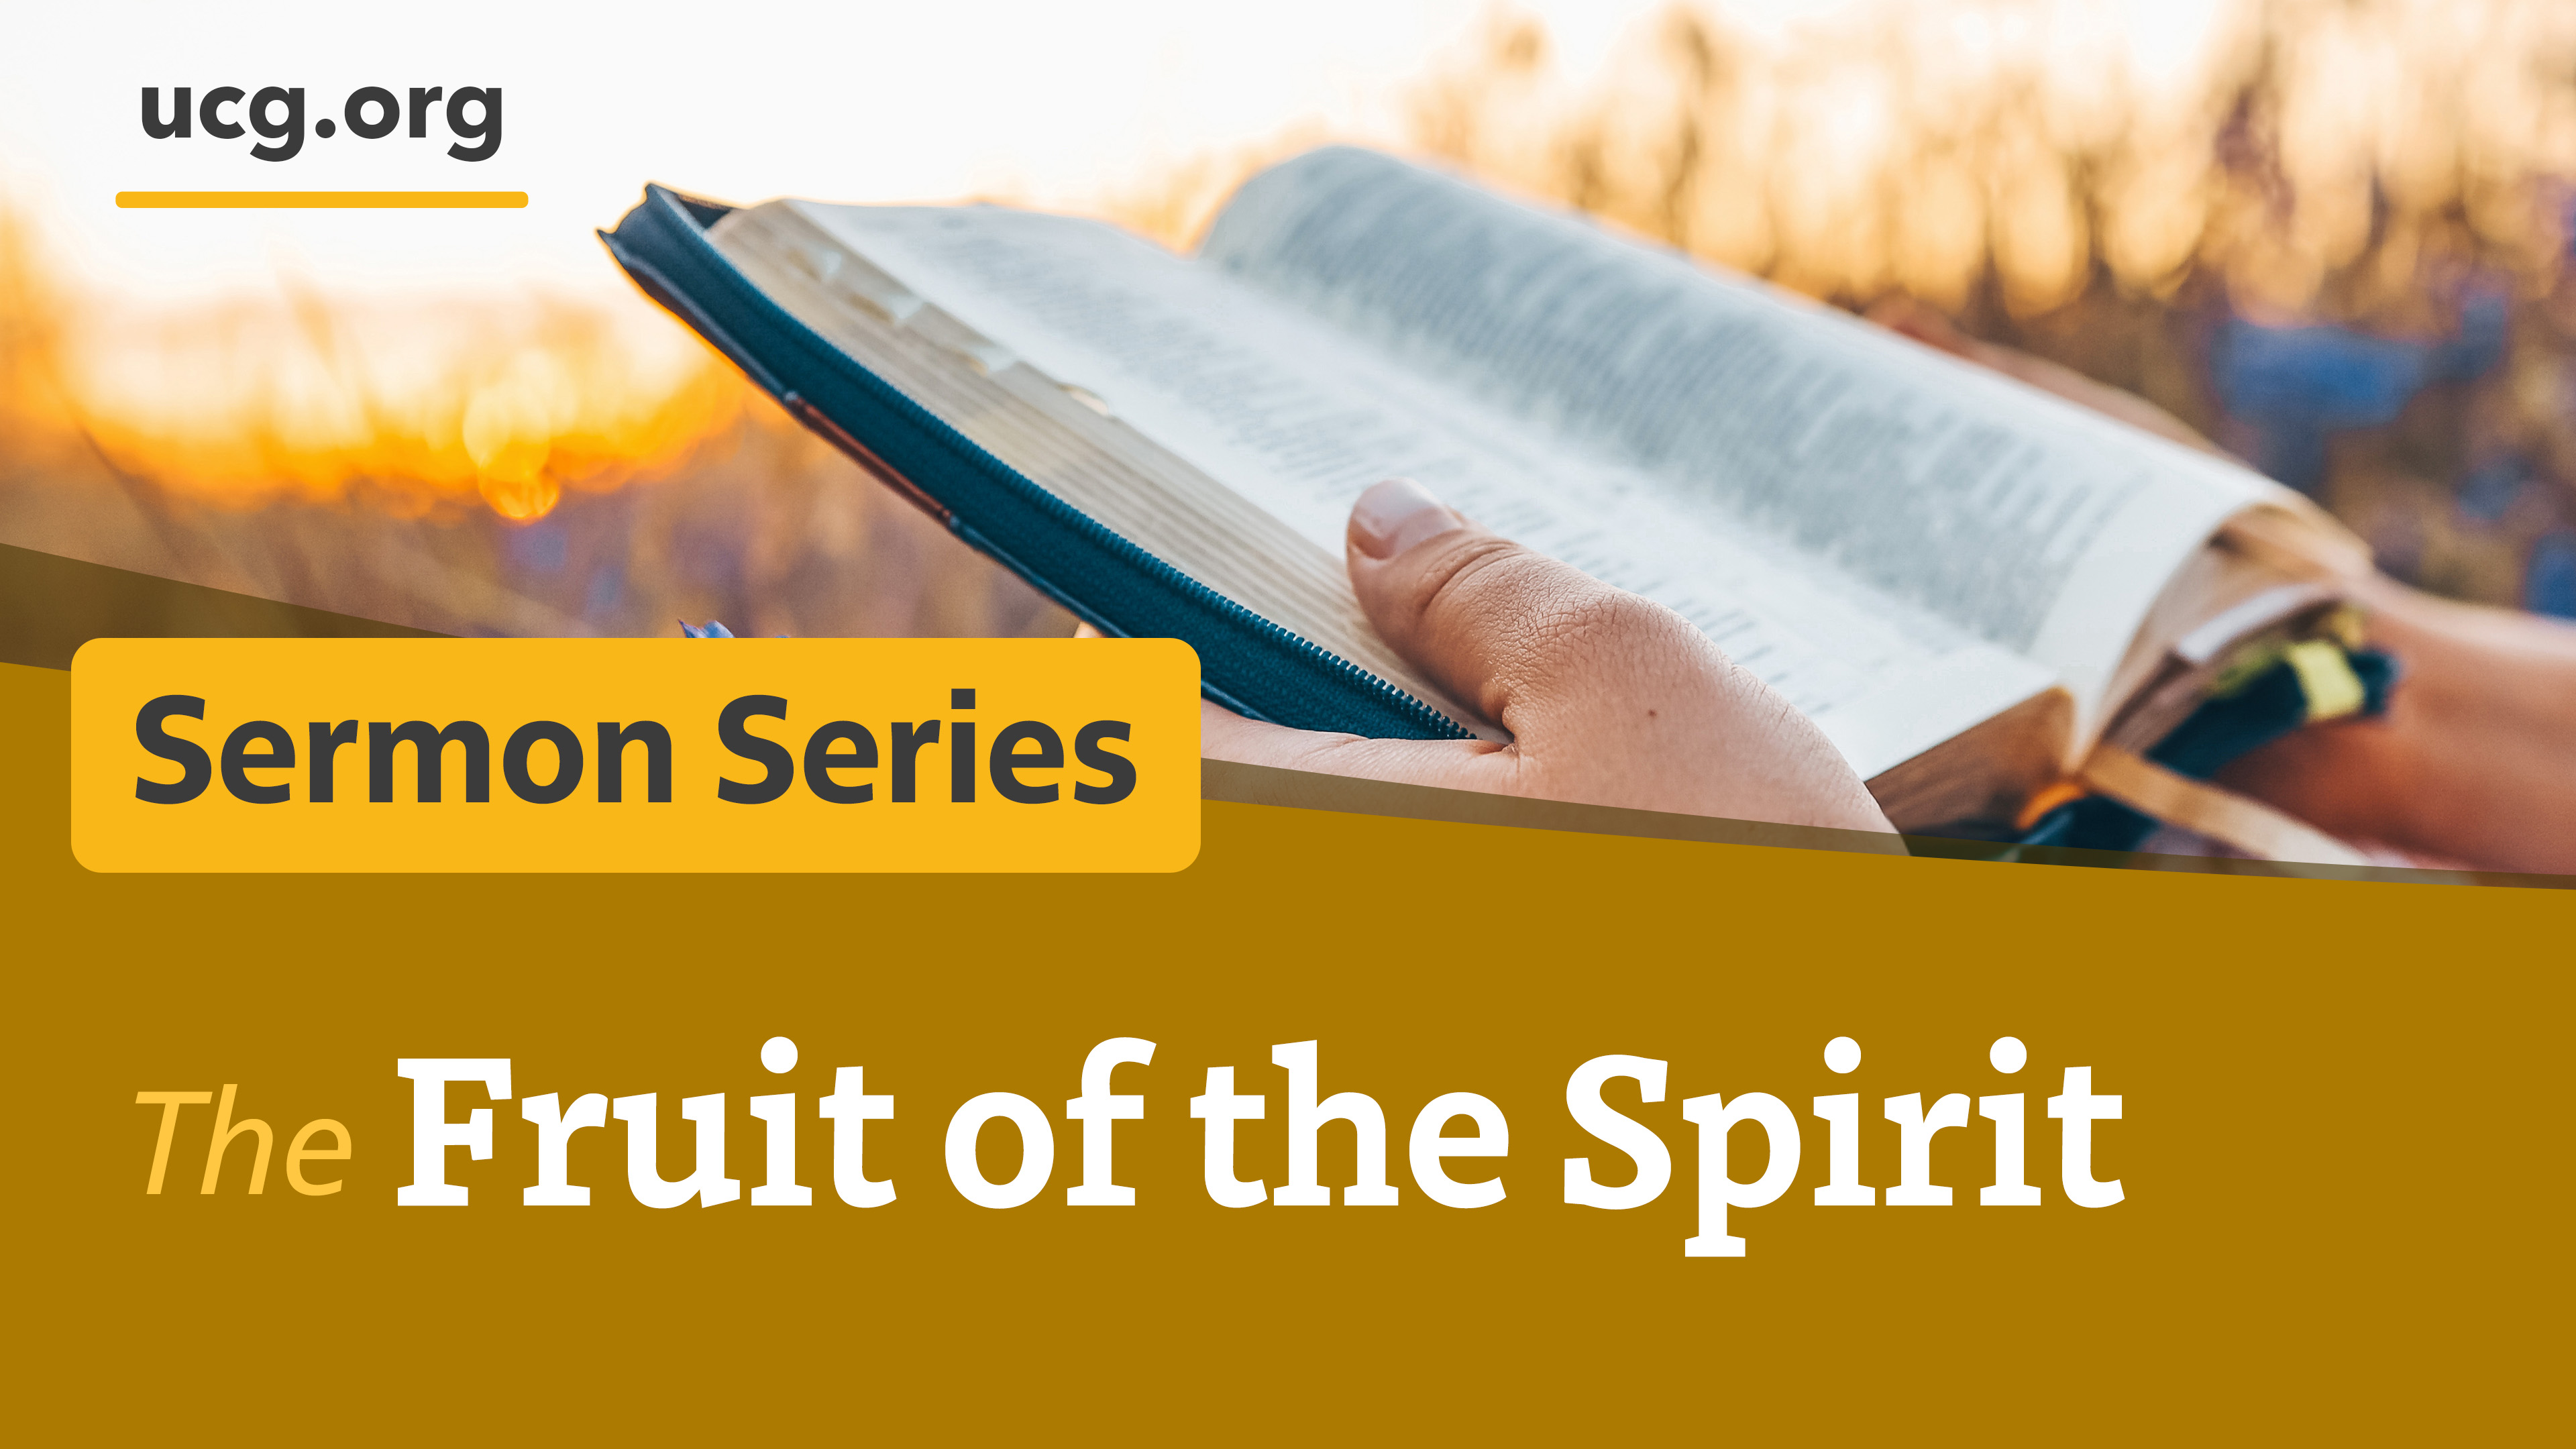 The Fruit of the Spirit series